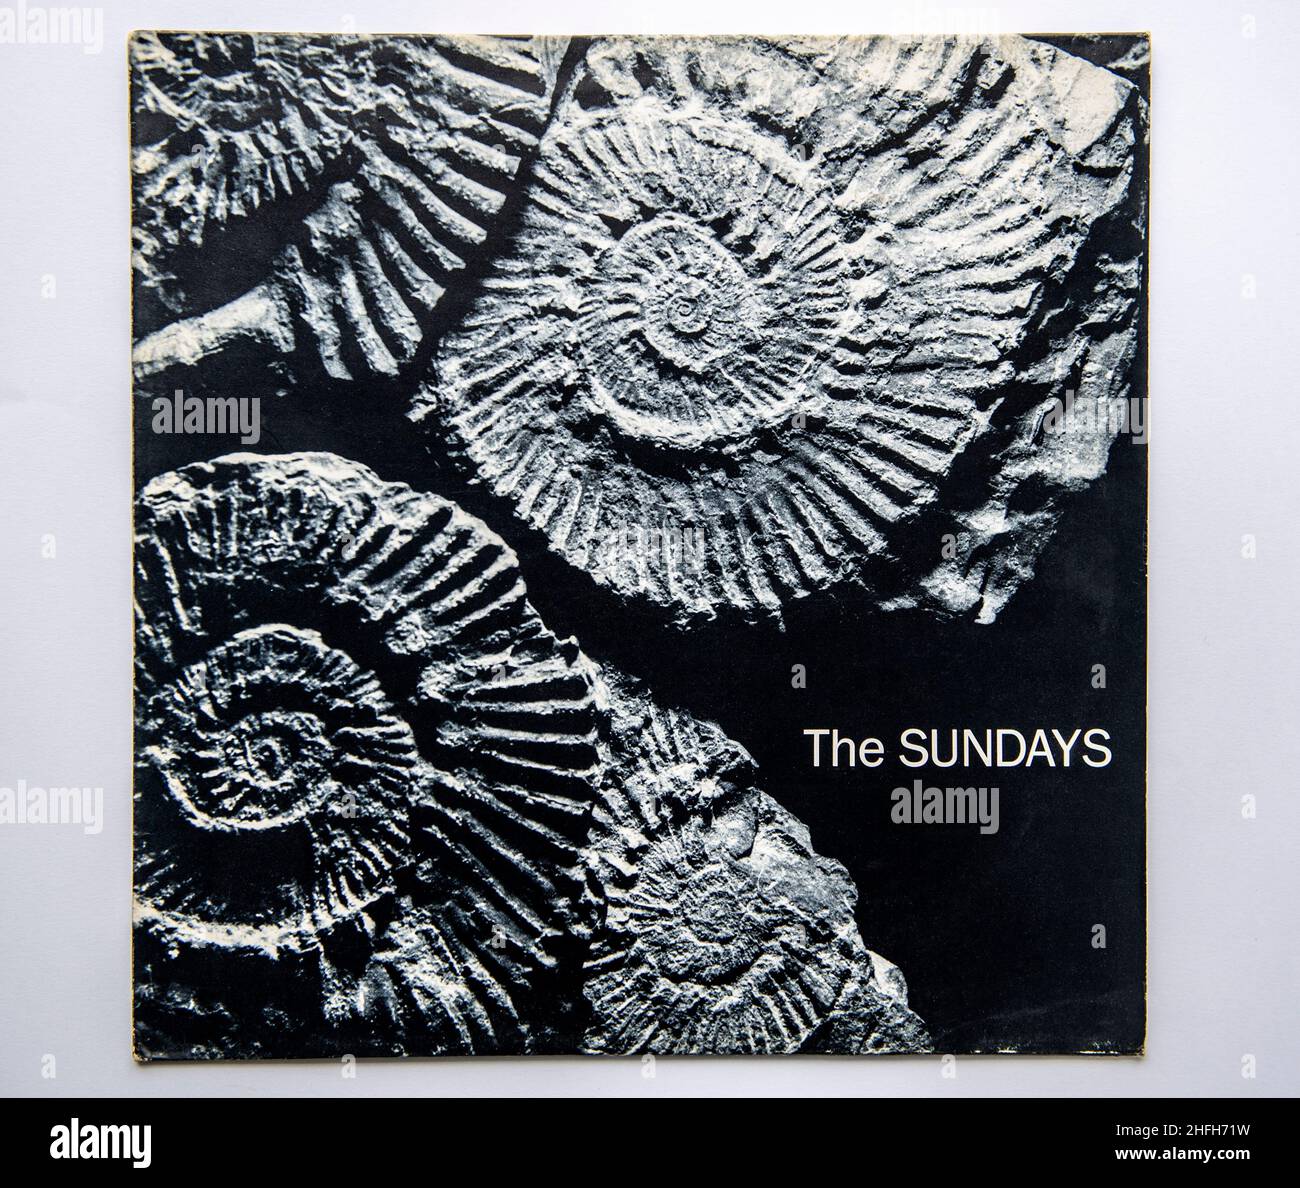 LP cover of Reading, Writing and Arithmetic, the debut studio album by The Sundays, released in 1990 Stock Photo